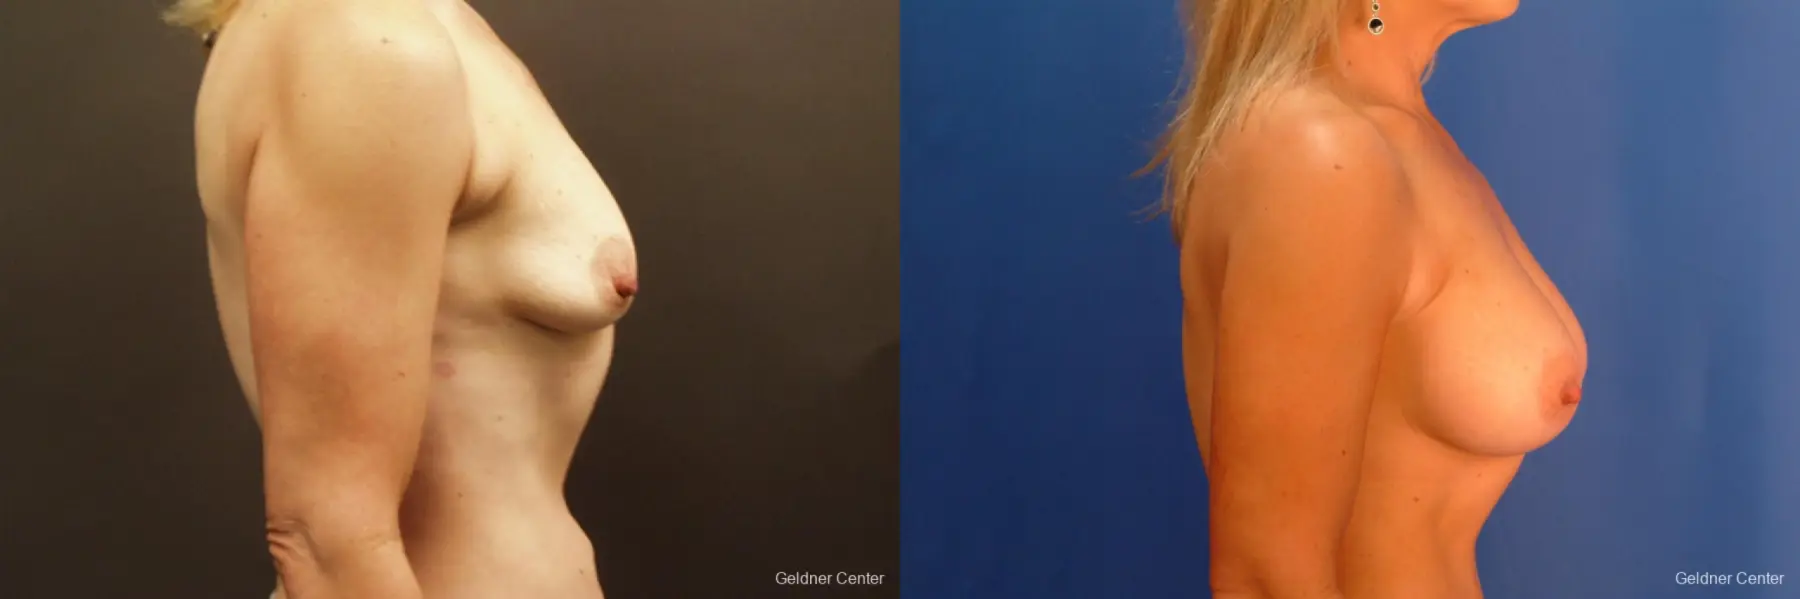 Breast Augmentation Hinsdale, Chicago 2632 - Before and After 2